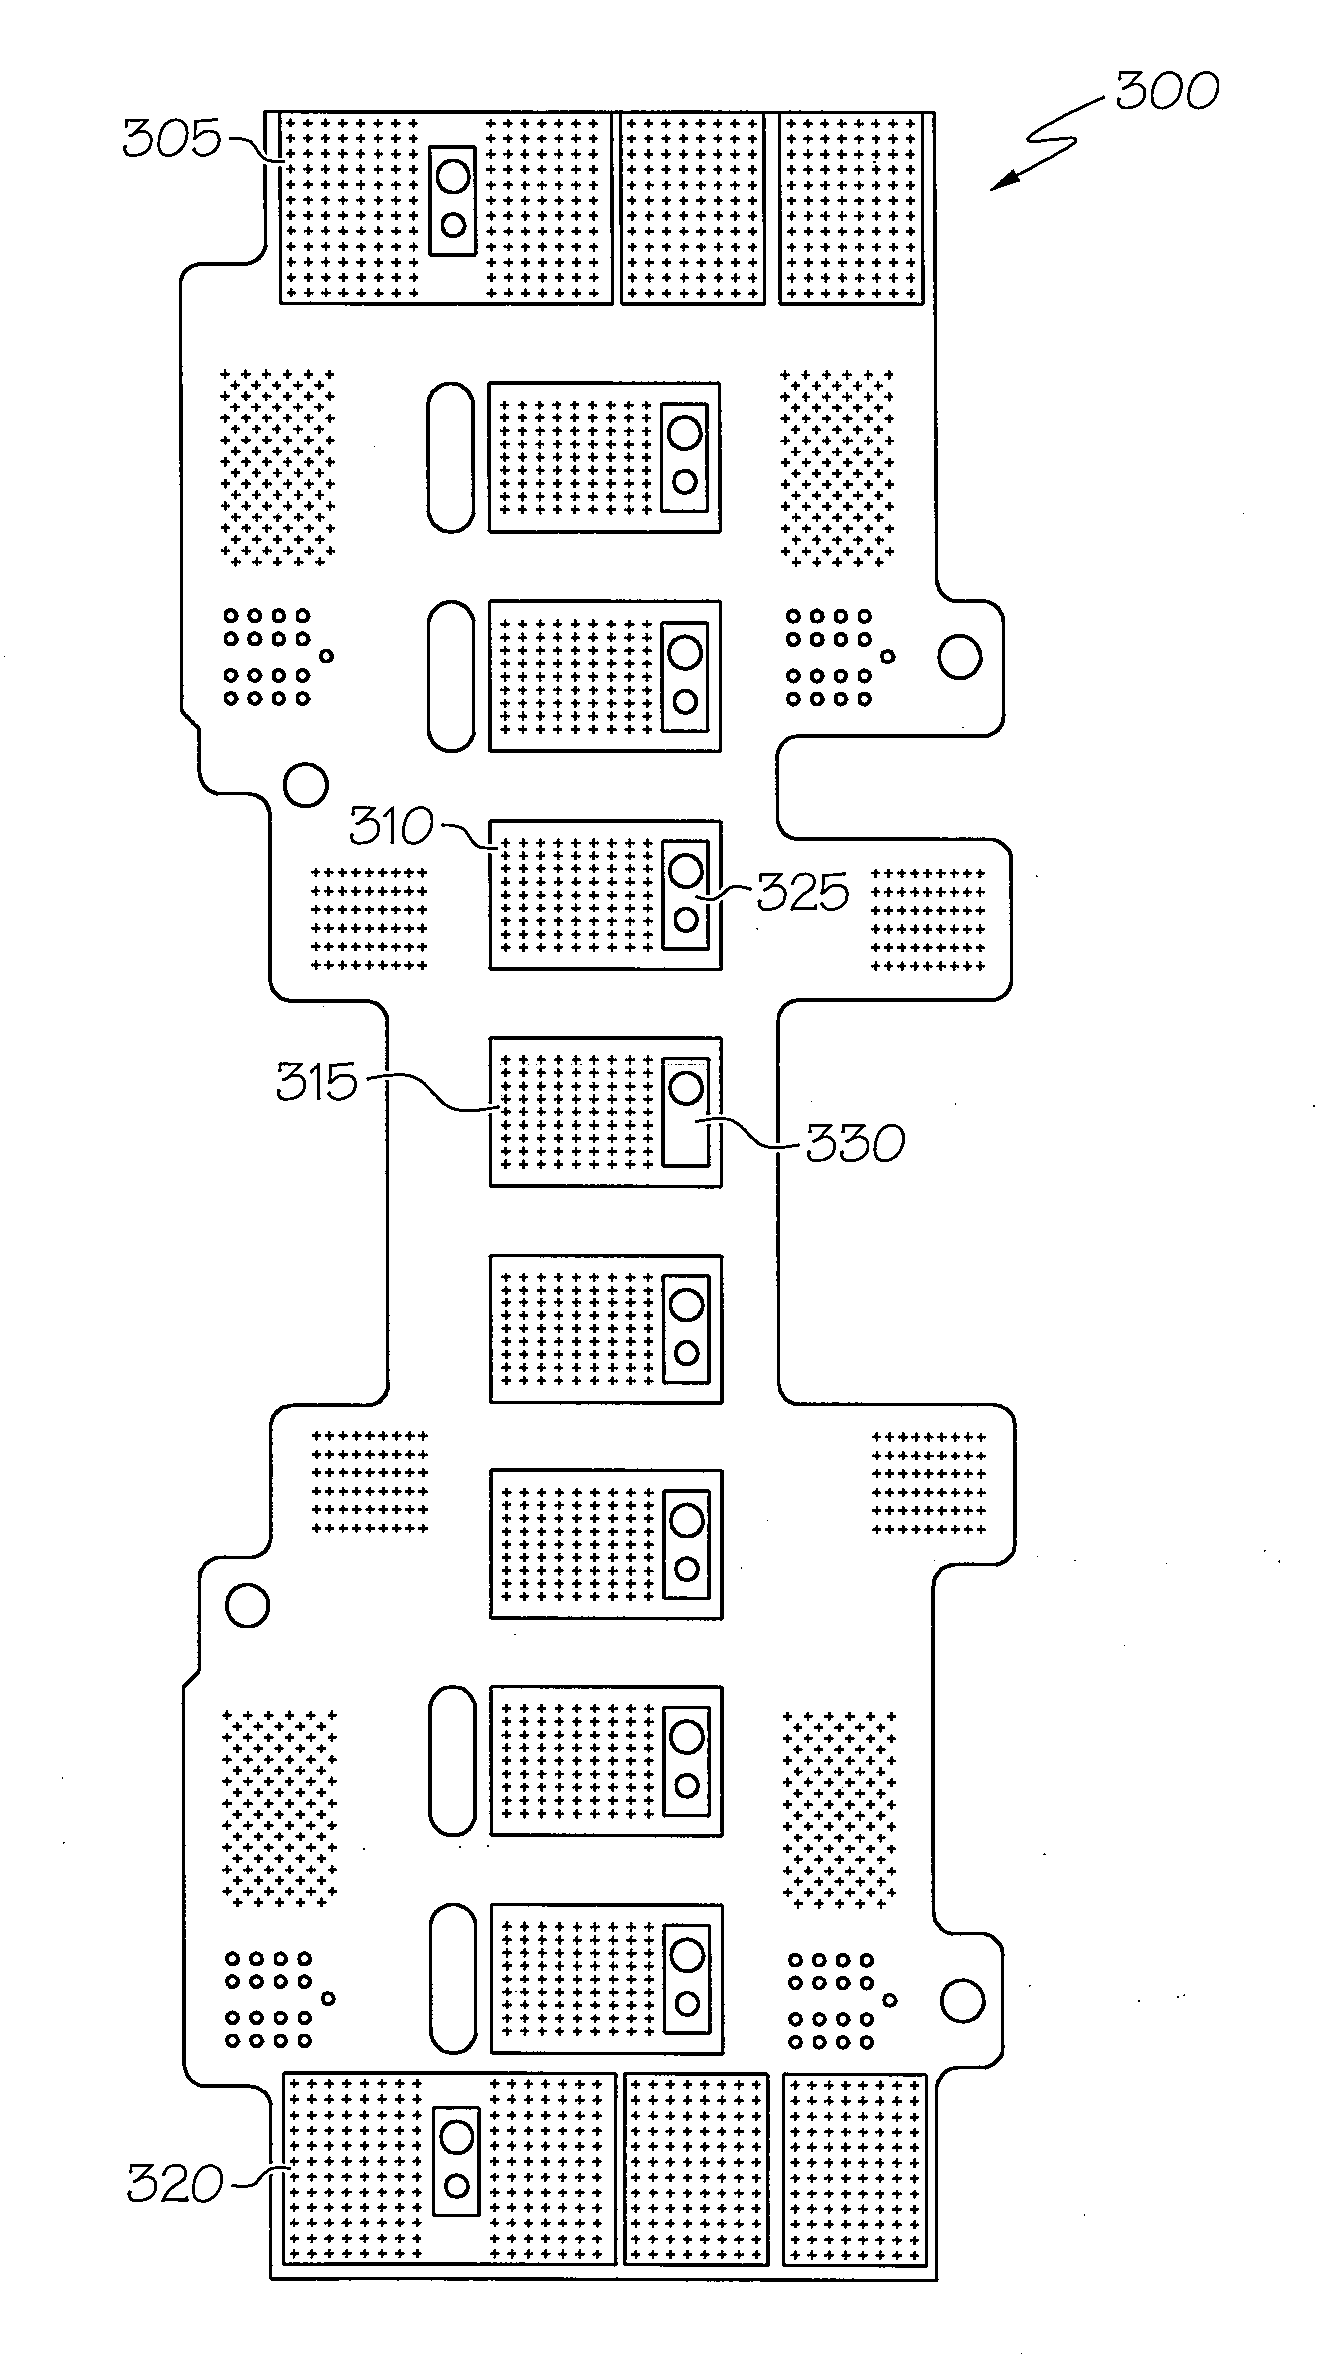 Shared docking bay accommodating either a multidrive tray or a battery backup unit